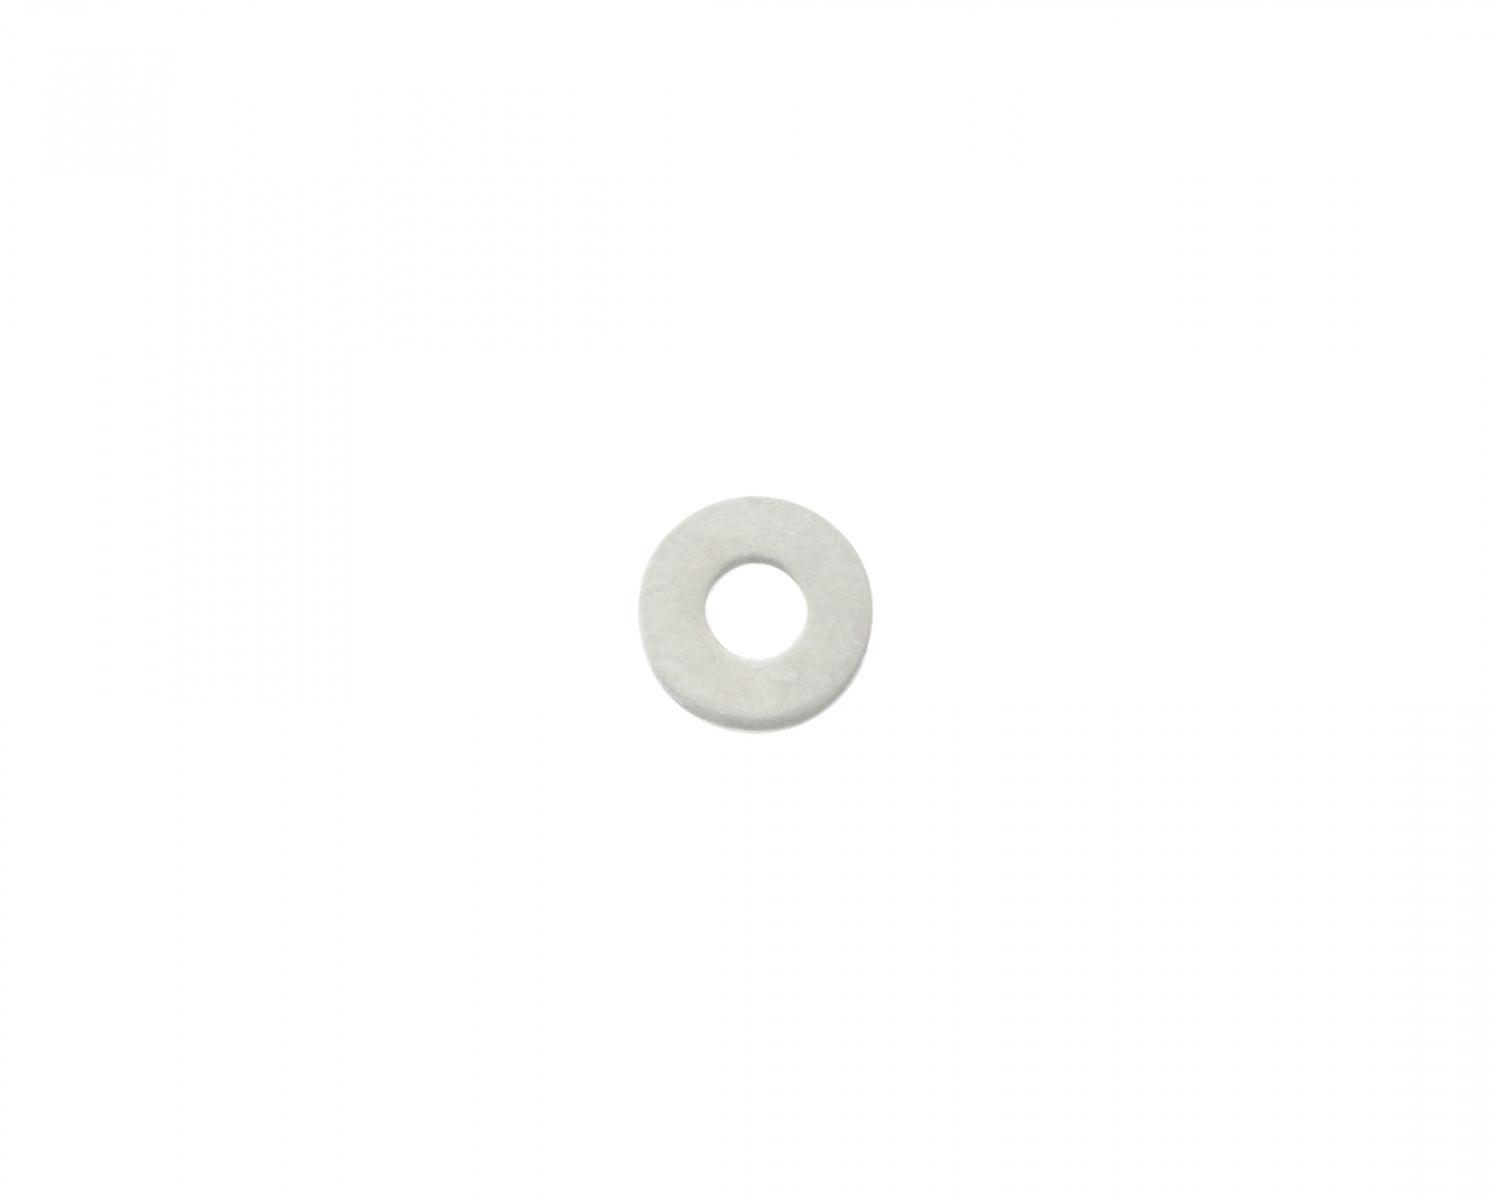 TapeTech® #6 Flat Washer. Part number 489023